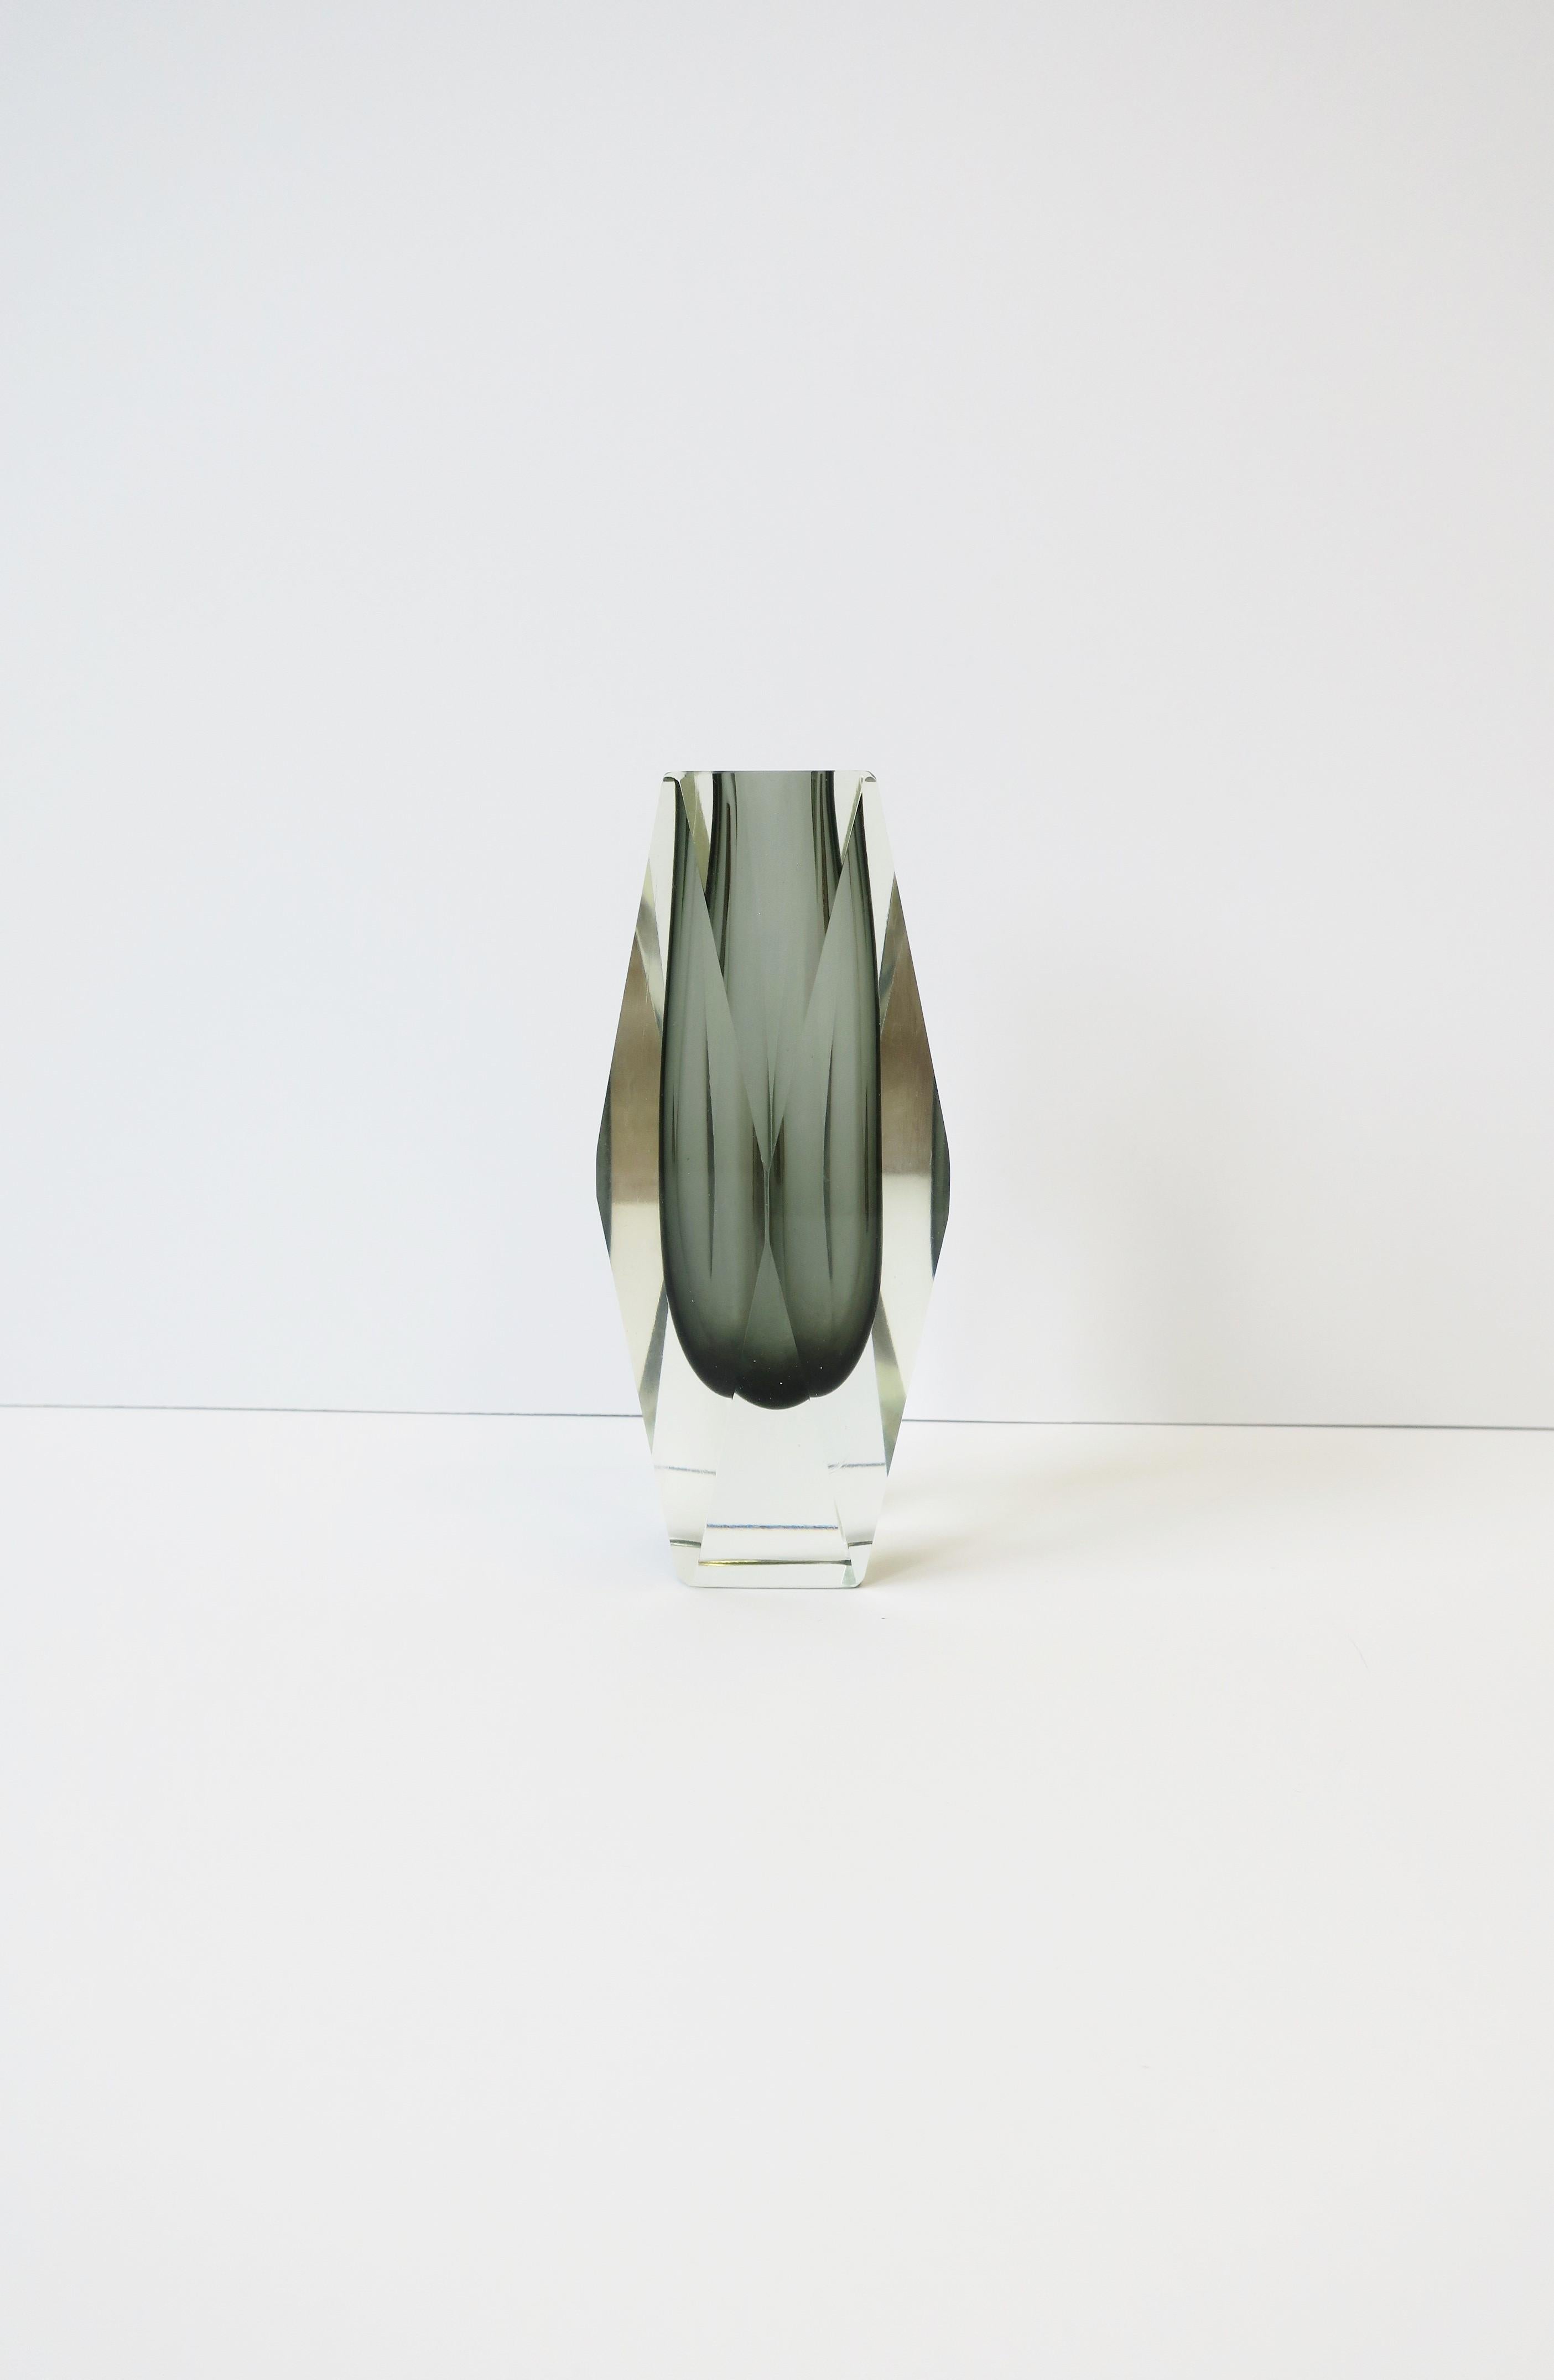 A very beautiful Italian Murano smoked grey charcoal faceted art glass vase by Alessandro Mandruzzato for Sommerso, circa mid to late-20th century, Italy. Beautiful at any angle. Dimensions: 6.25